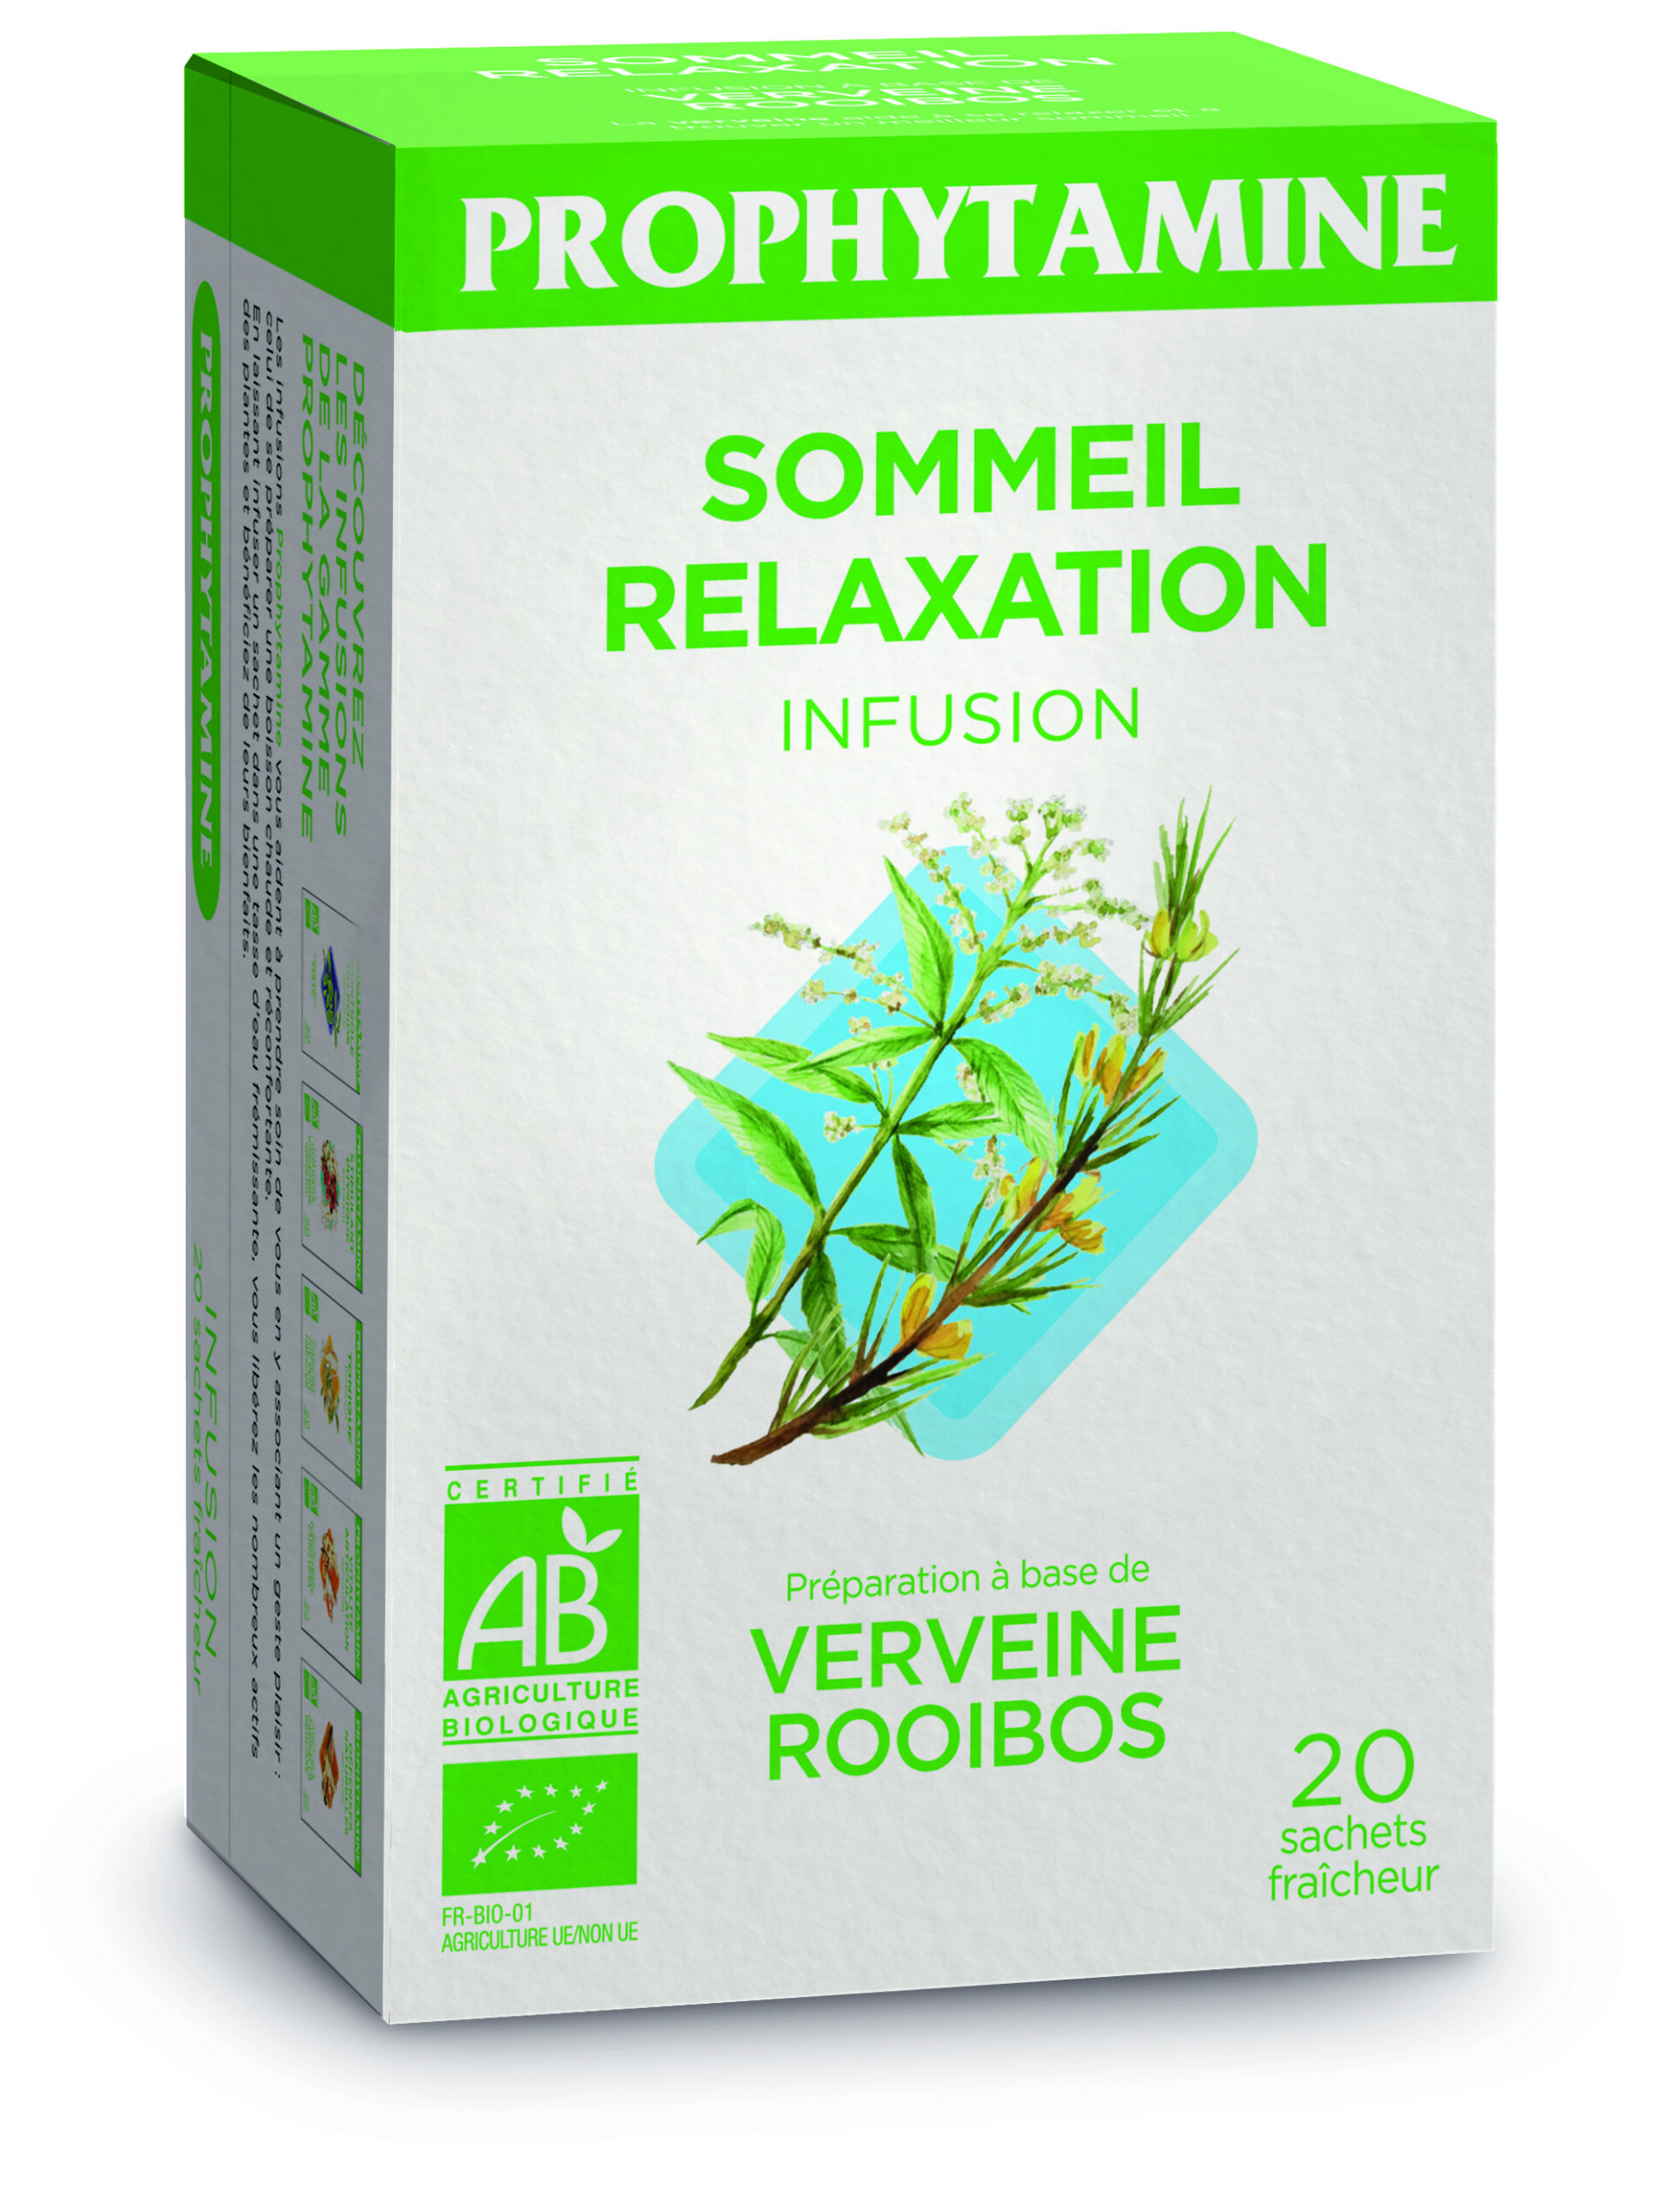 Infusion prophytamine sommeil relaxation bio 20 sach